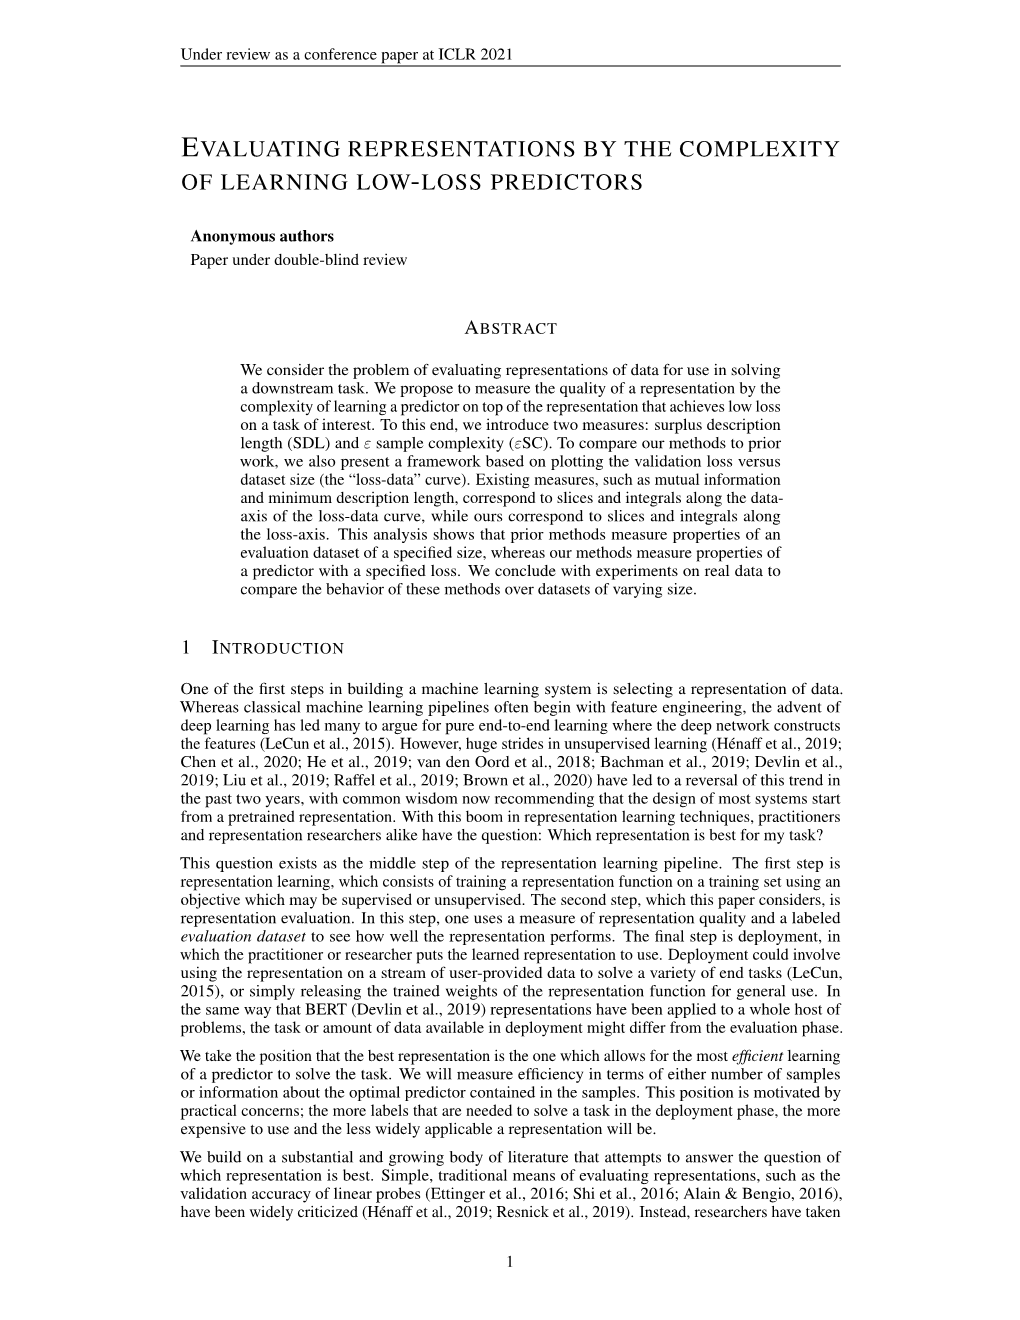 Evaluating Representations by the Complexity Oflearninglow-Losspredictors